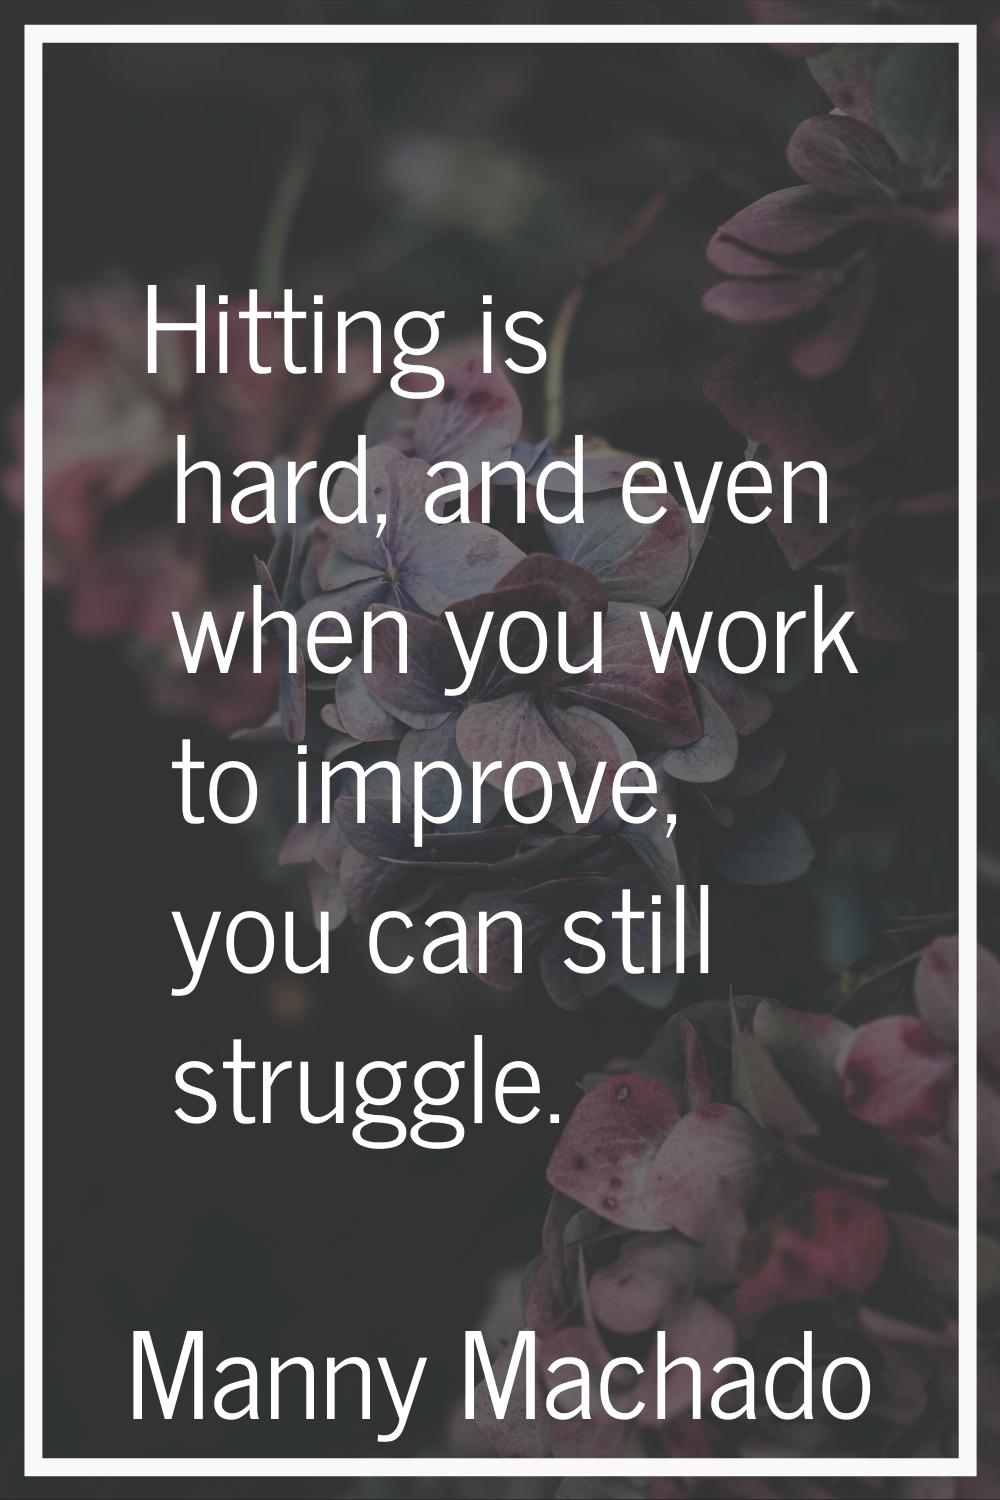 Hitting is hard, and even when you work to improve, you can still struggle.